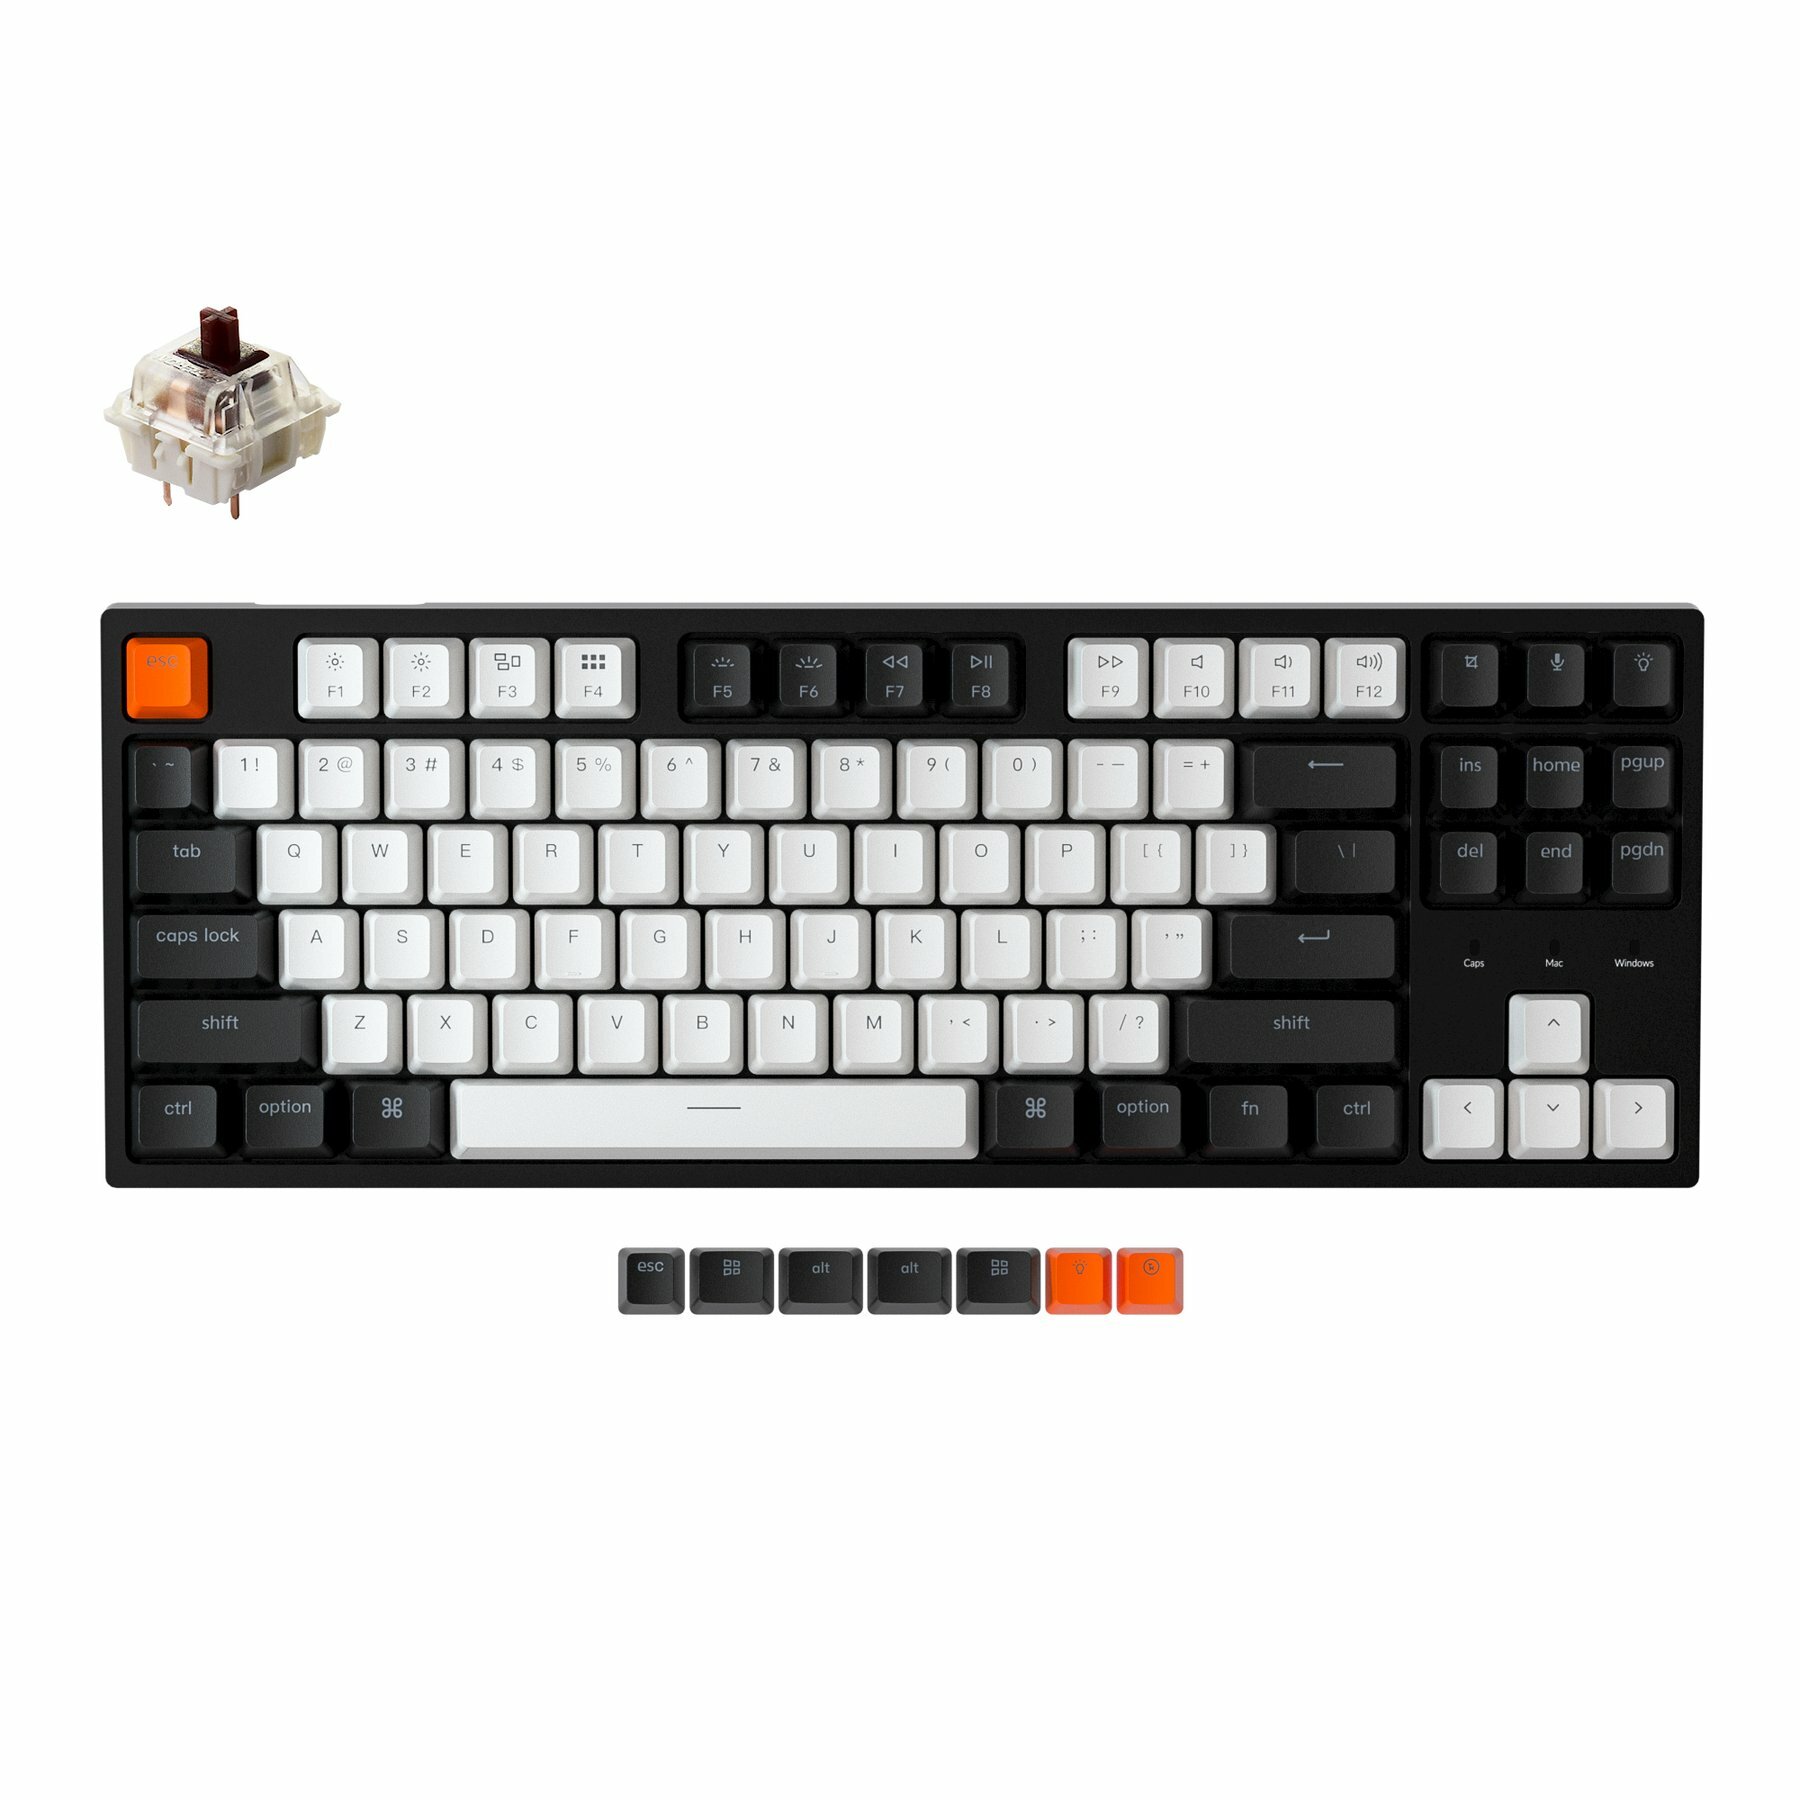 Keychron-C1-hot-swappable-wired-type-c-mechanical-keyboard-tenkeyless-layout-for-Mac-Windows-iOS-Gateron-Switch-Brown_1800x1800